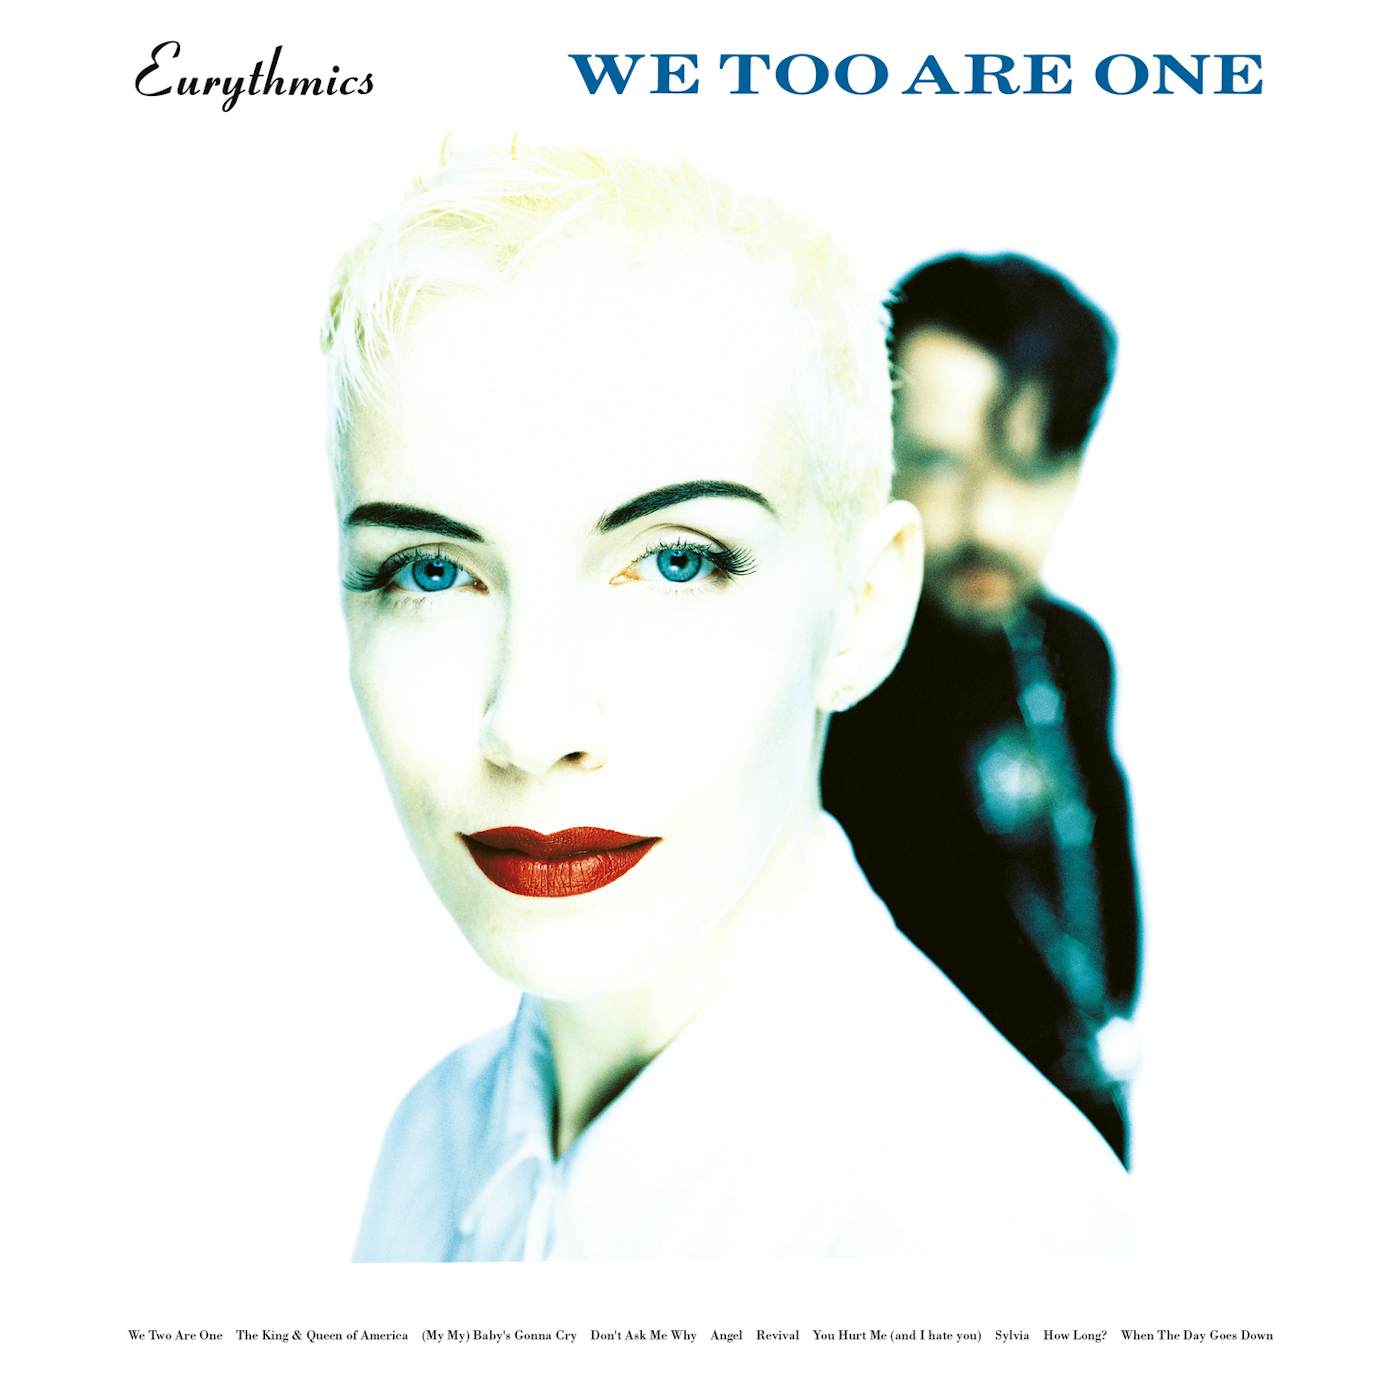 Eurythmics We Too Are One Vinyl Record